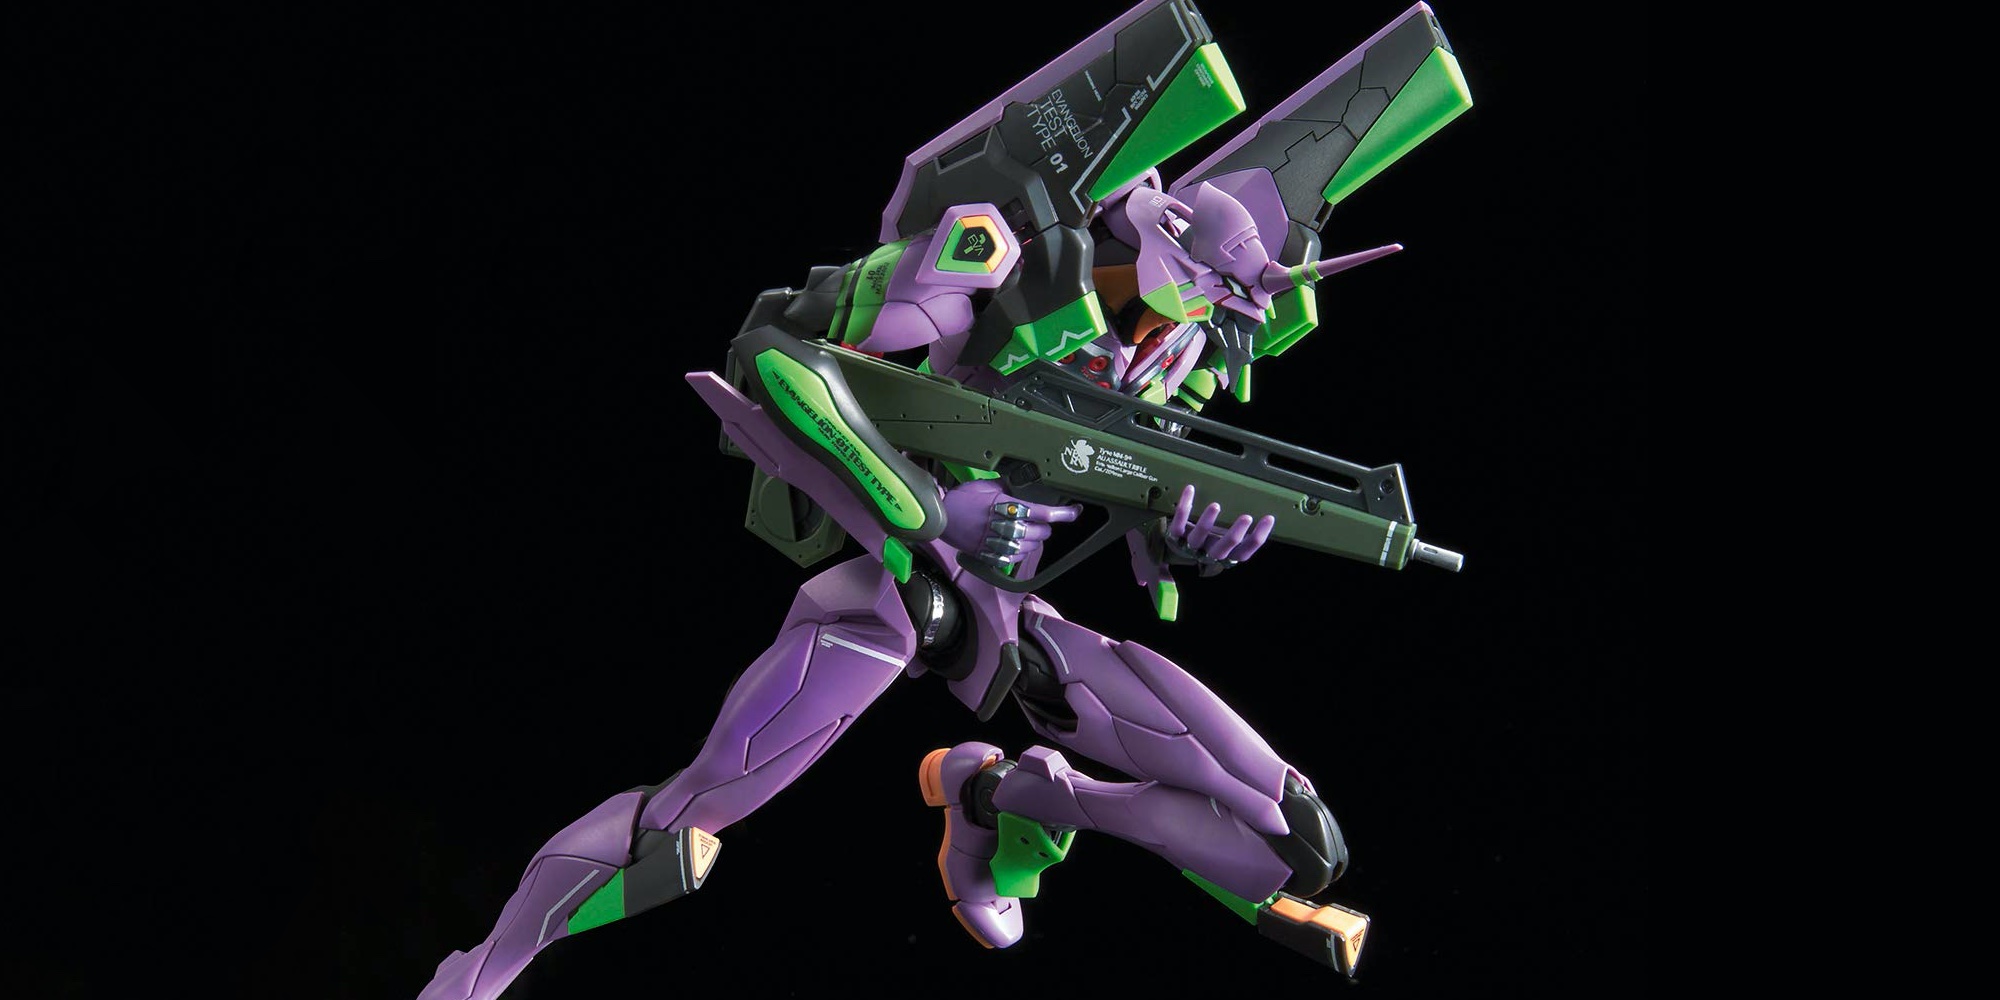 Evangelion model kit from Bandai now up for pre-order - 9to5Toys